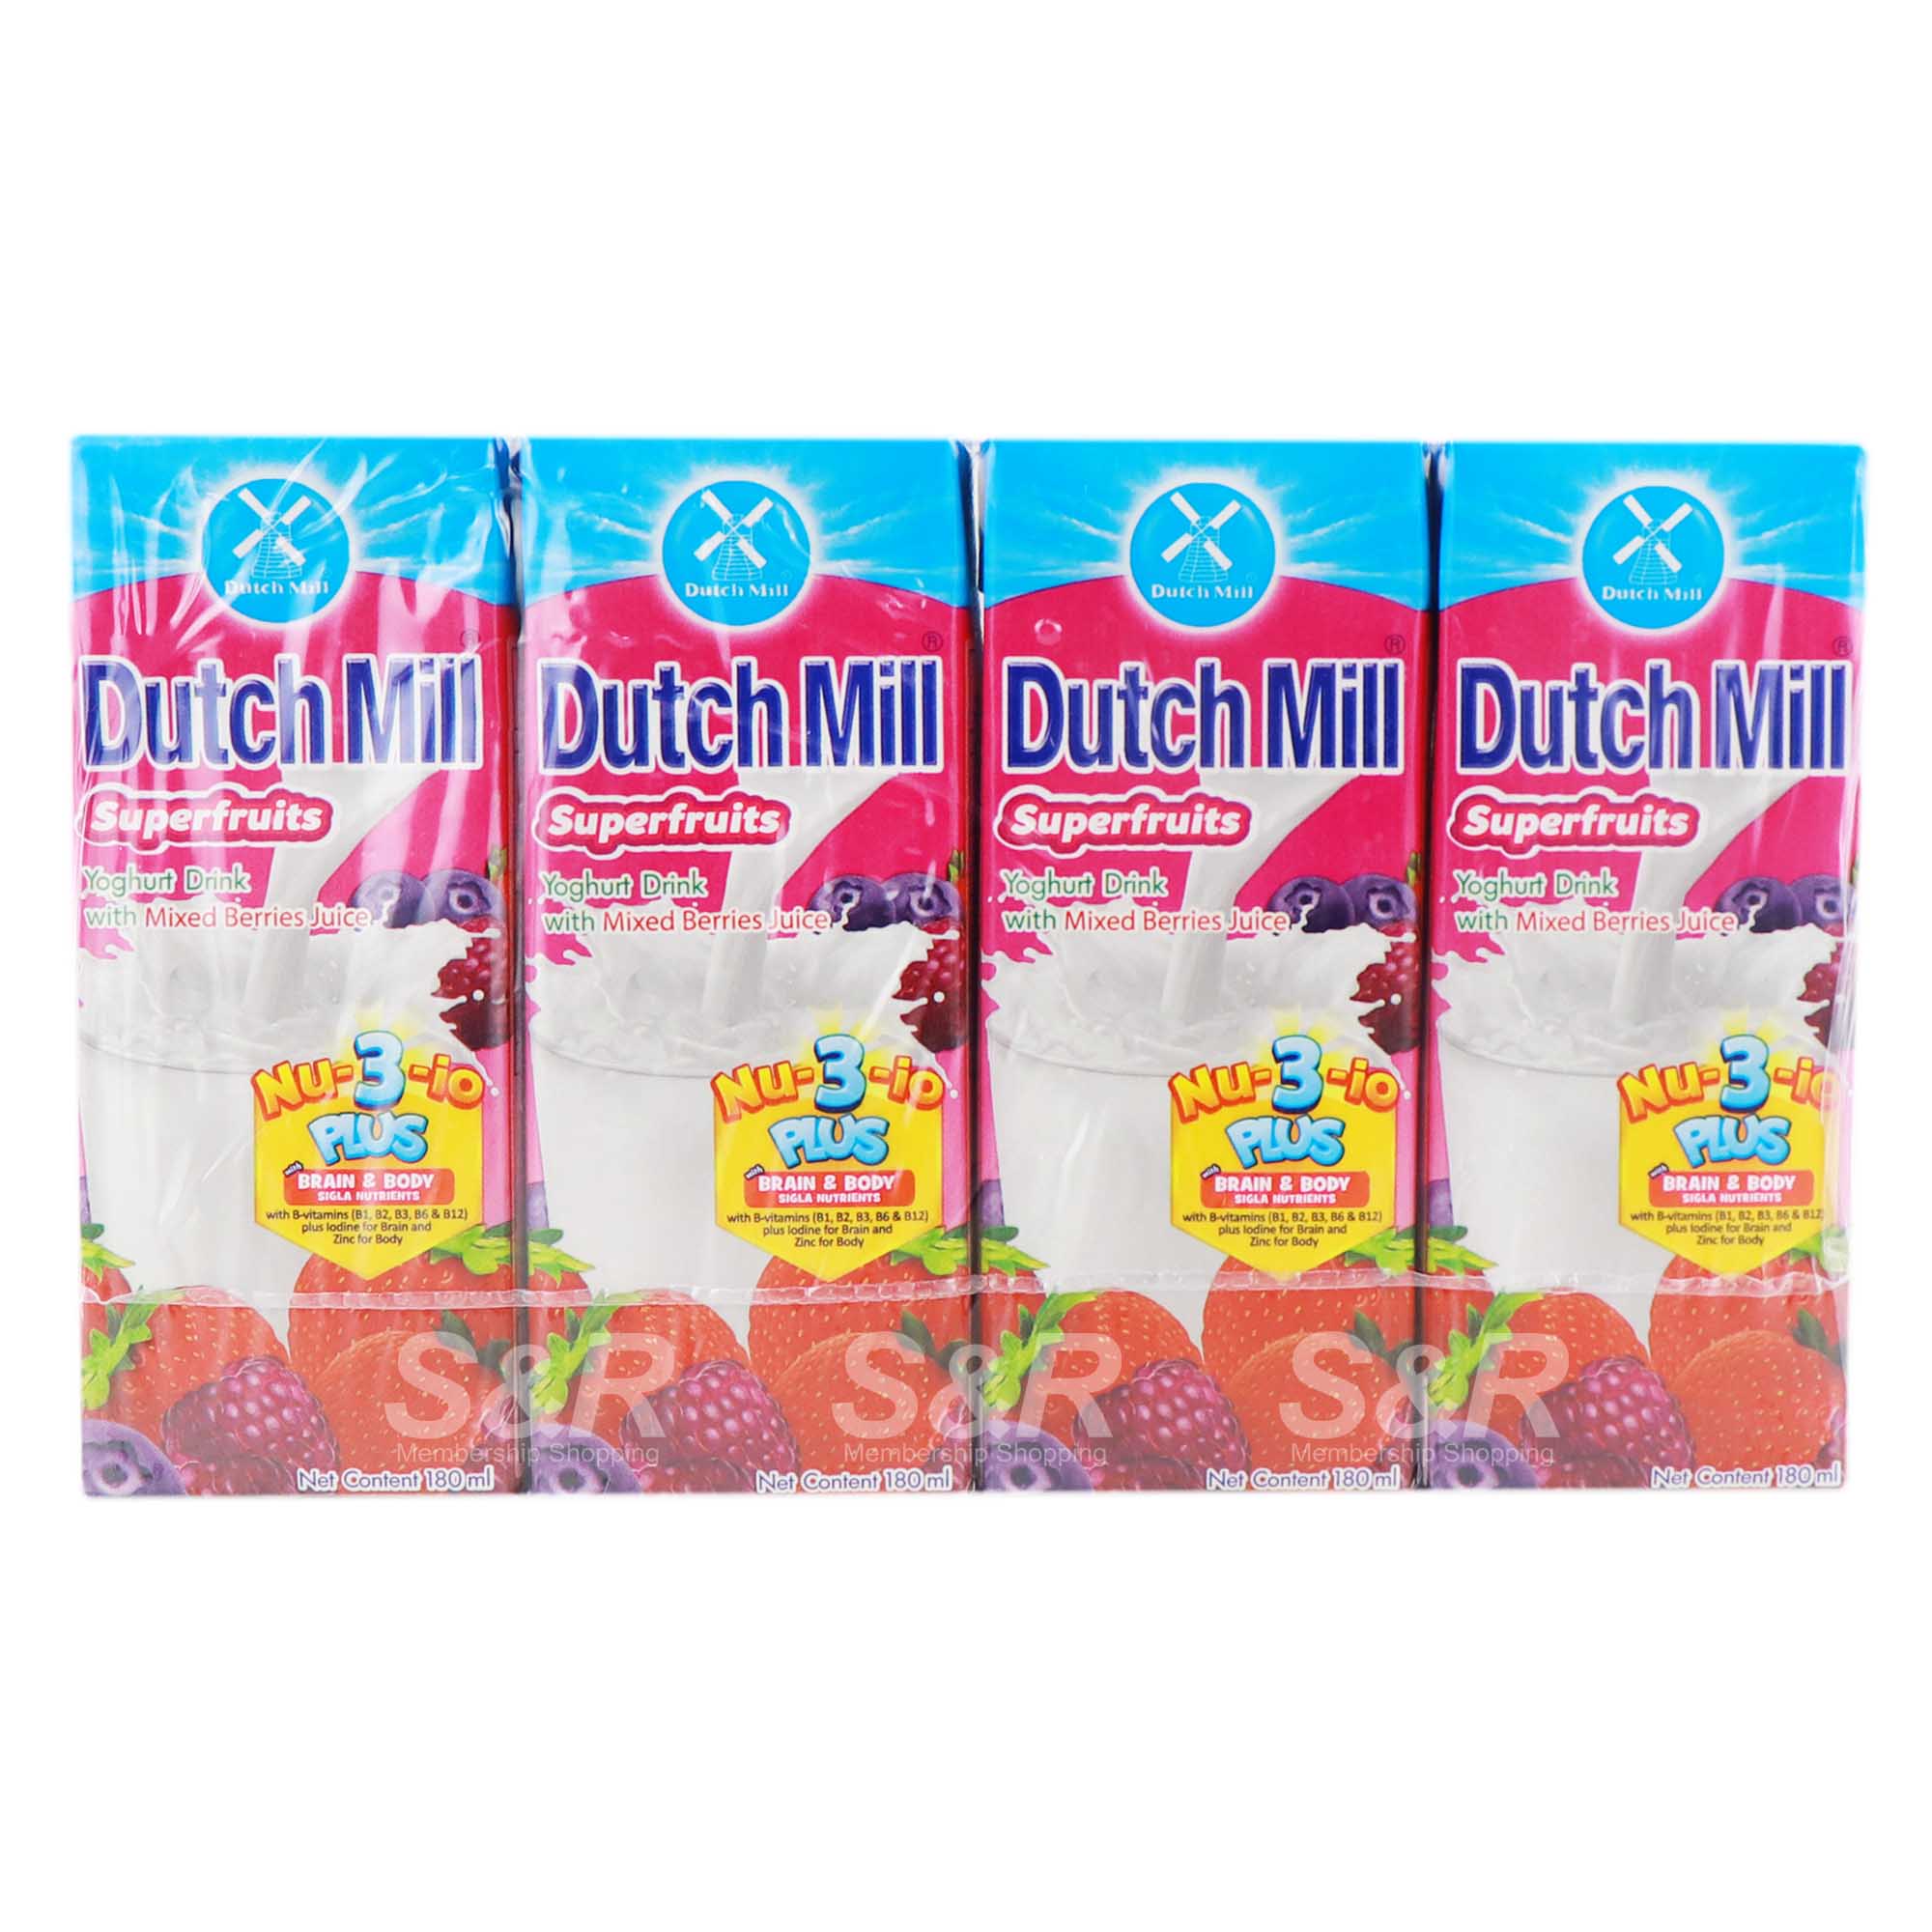 Dutchmill Superfruits Yoghurt Drink with Mixed Berries Juice 4pcs